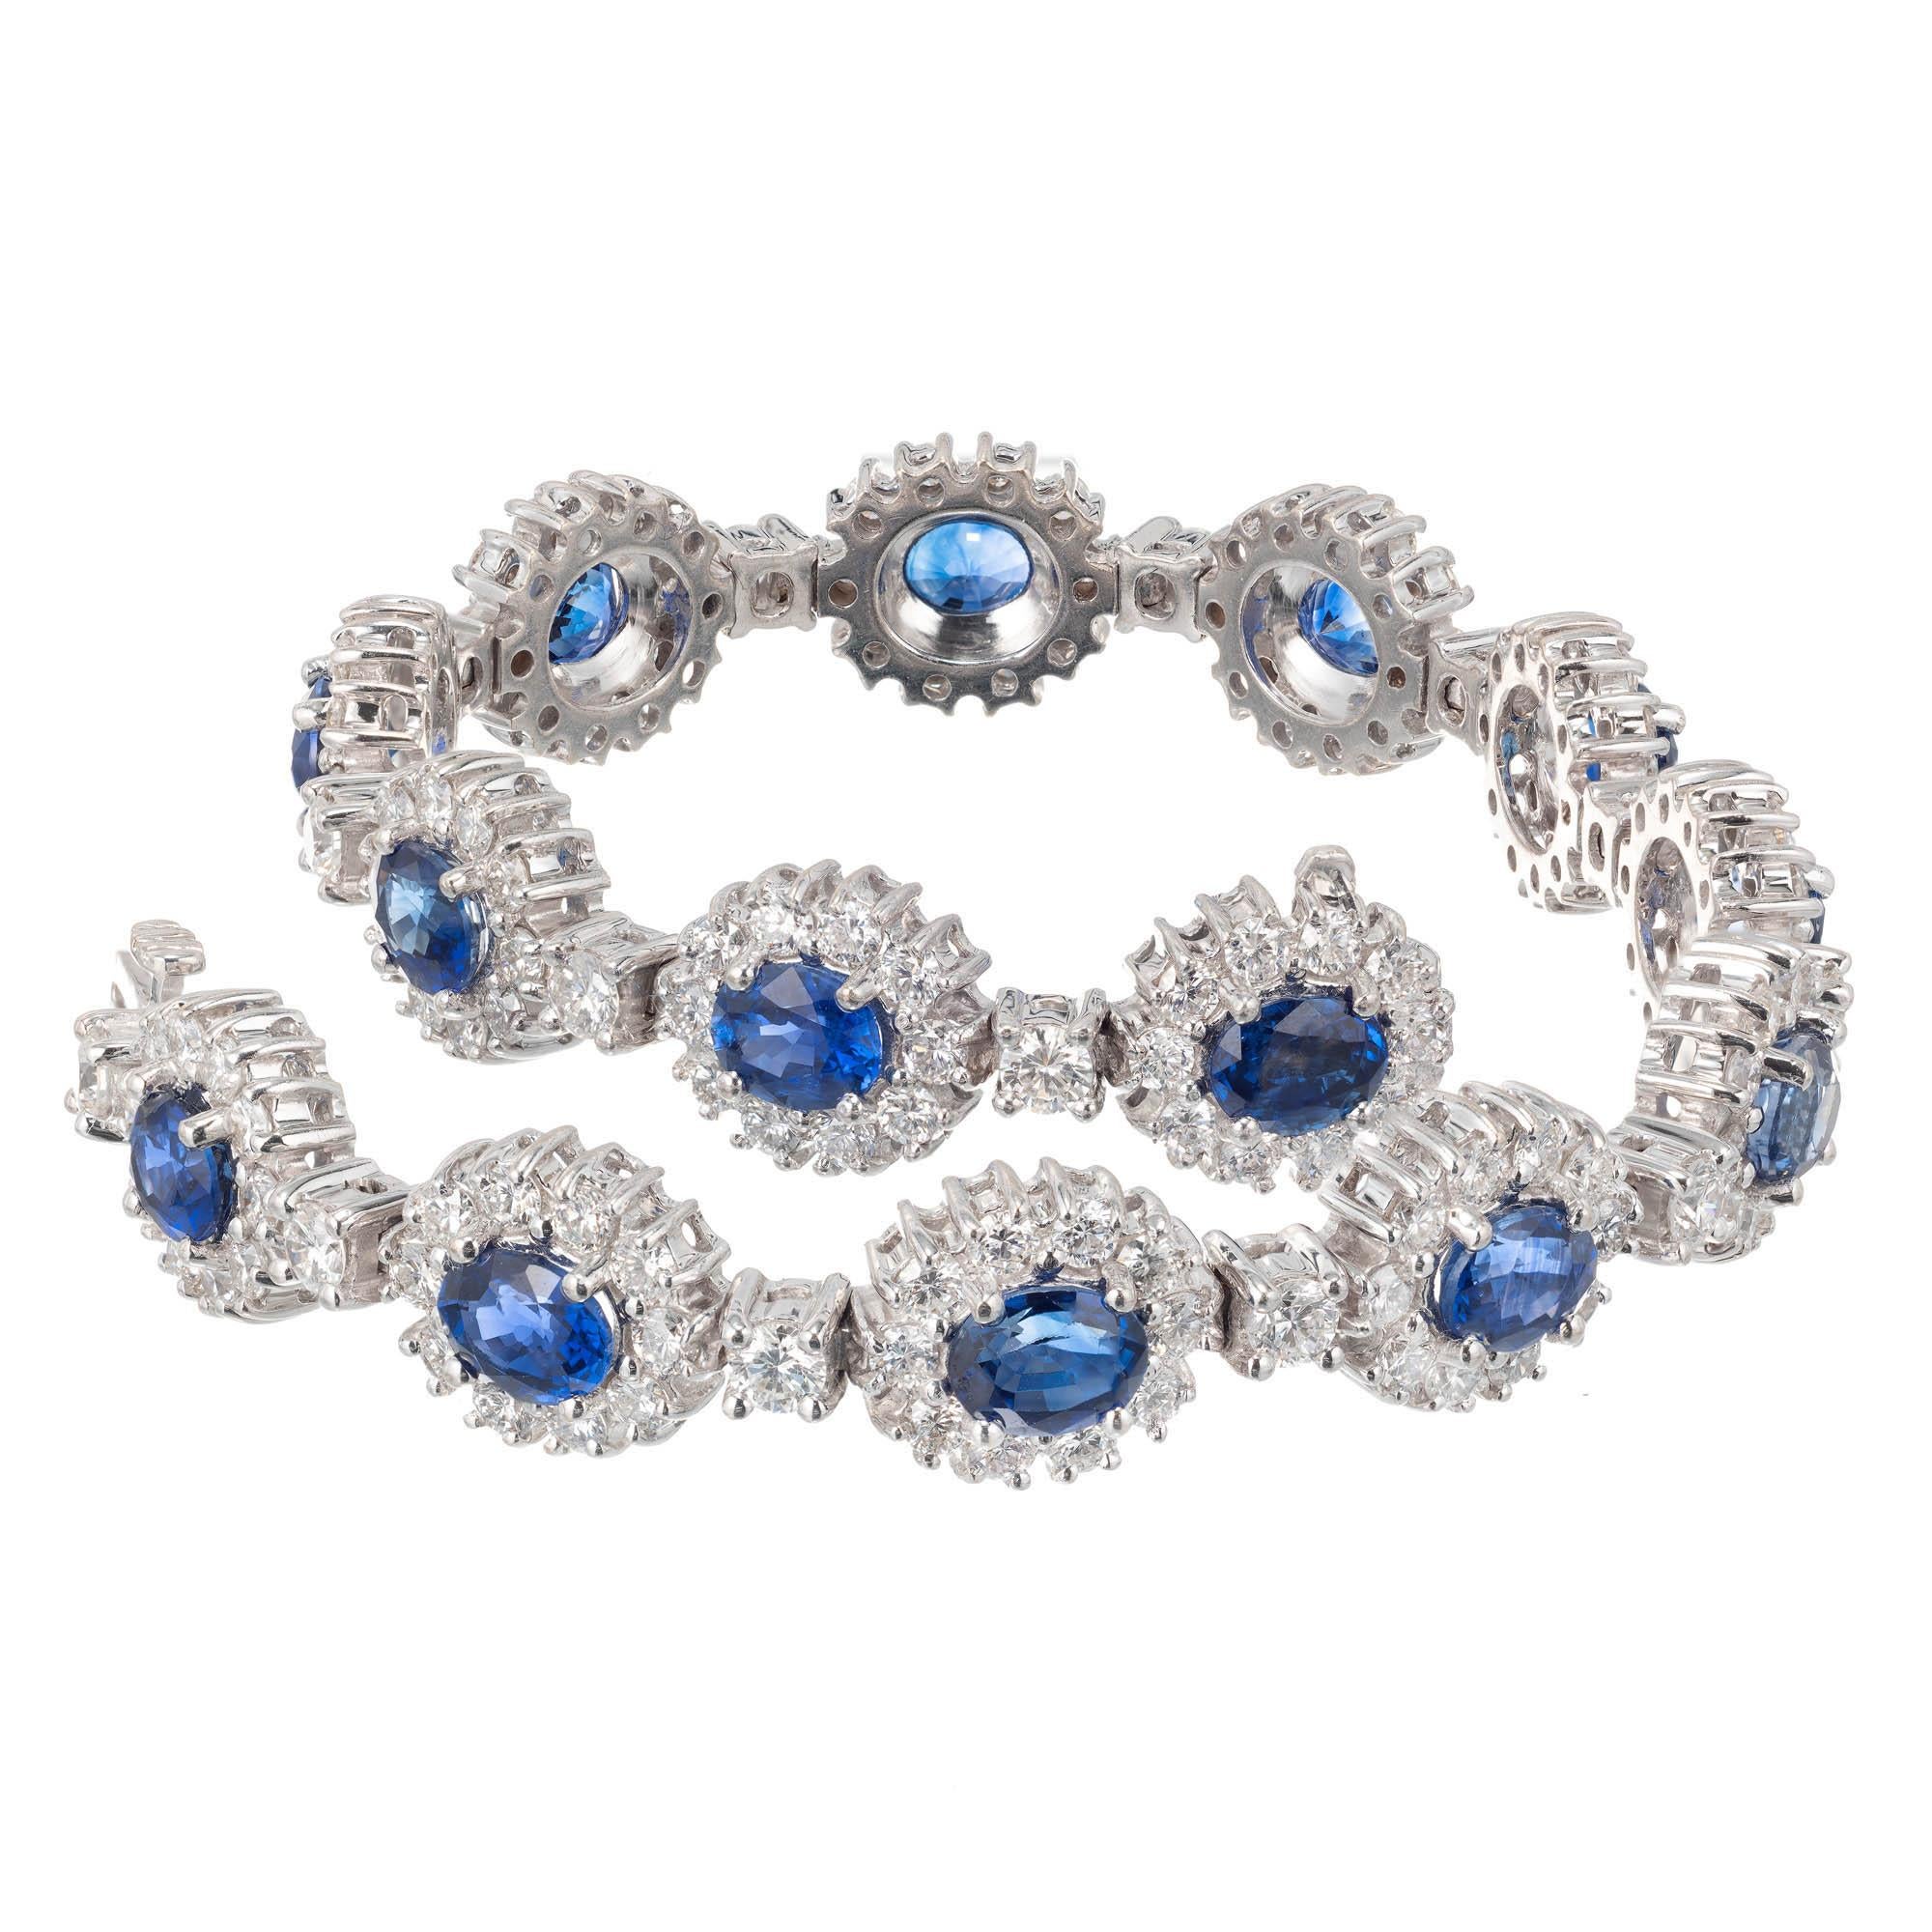 Vivid oval bright blue sapphire and Diamond halo bracelet with hidden built in catch and secure underside safety.

18k white gold
Tested and stamped: 18k
14 oval vivid blue Sapphires, approx. total weight 7.90cts, SI, GIA certificate # 2185148253 